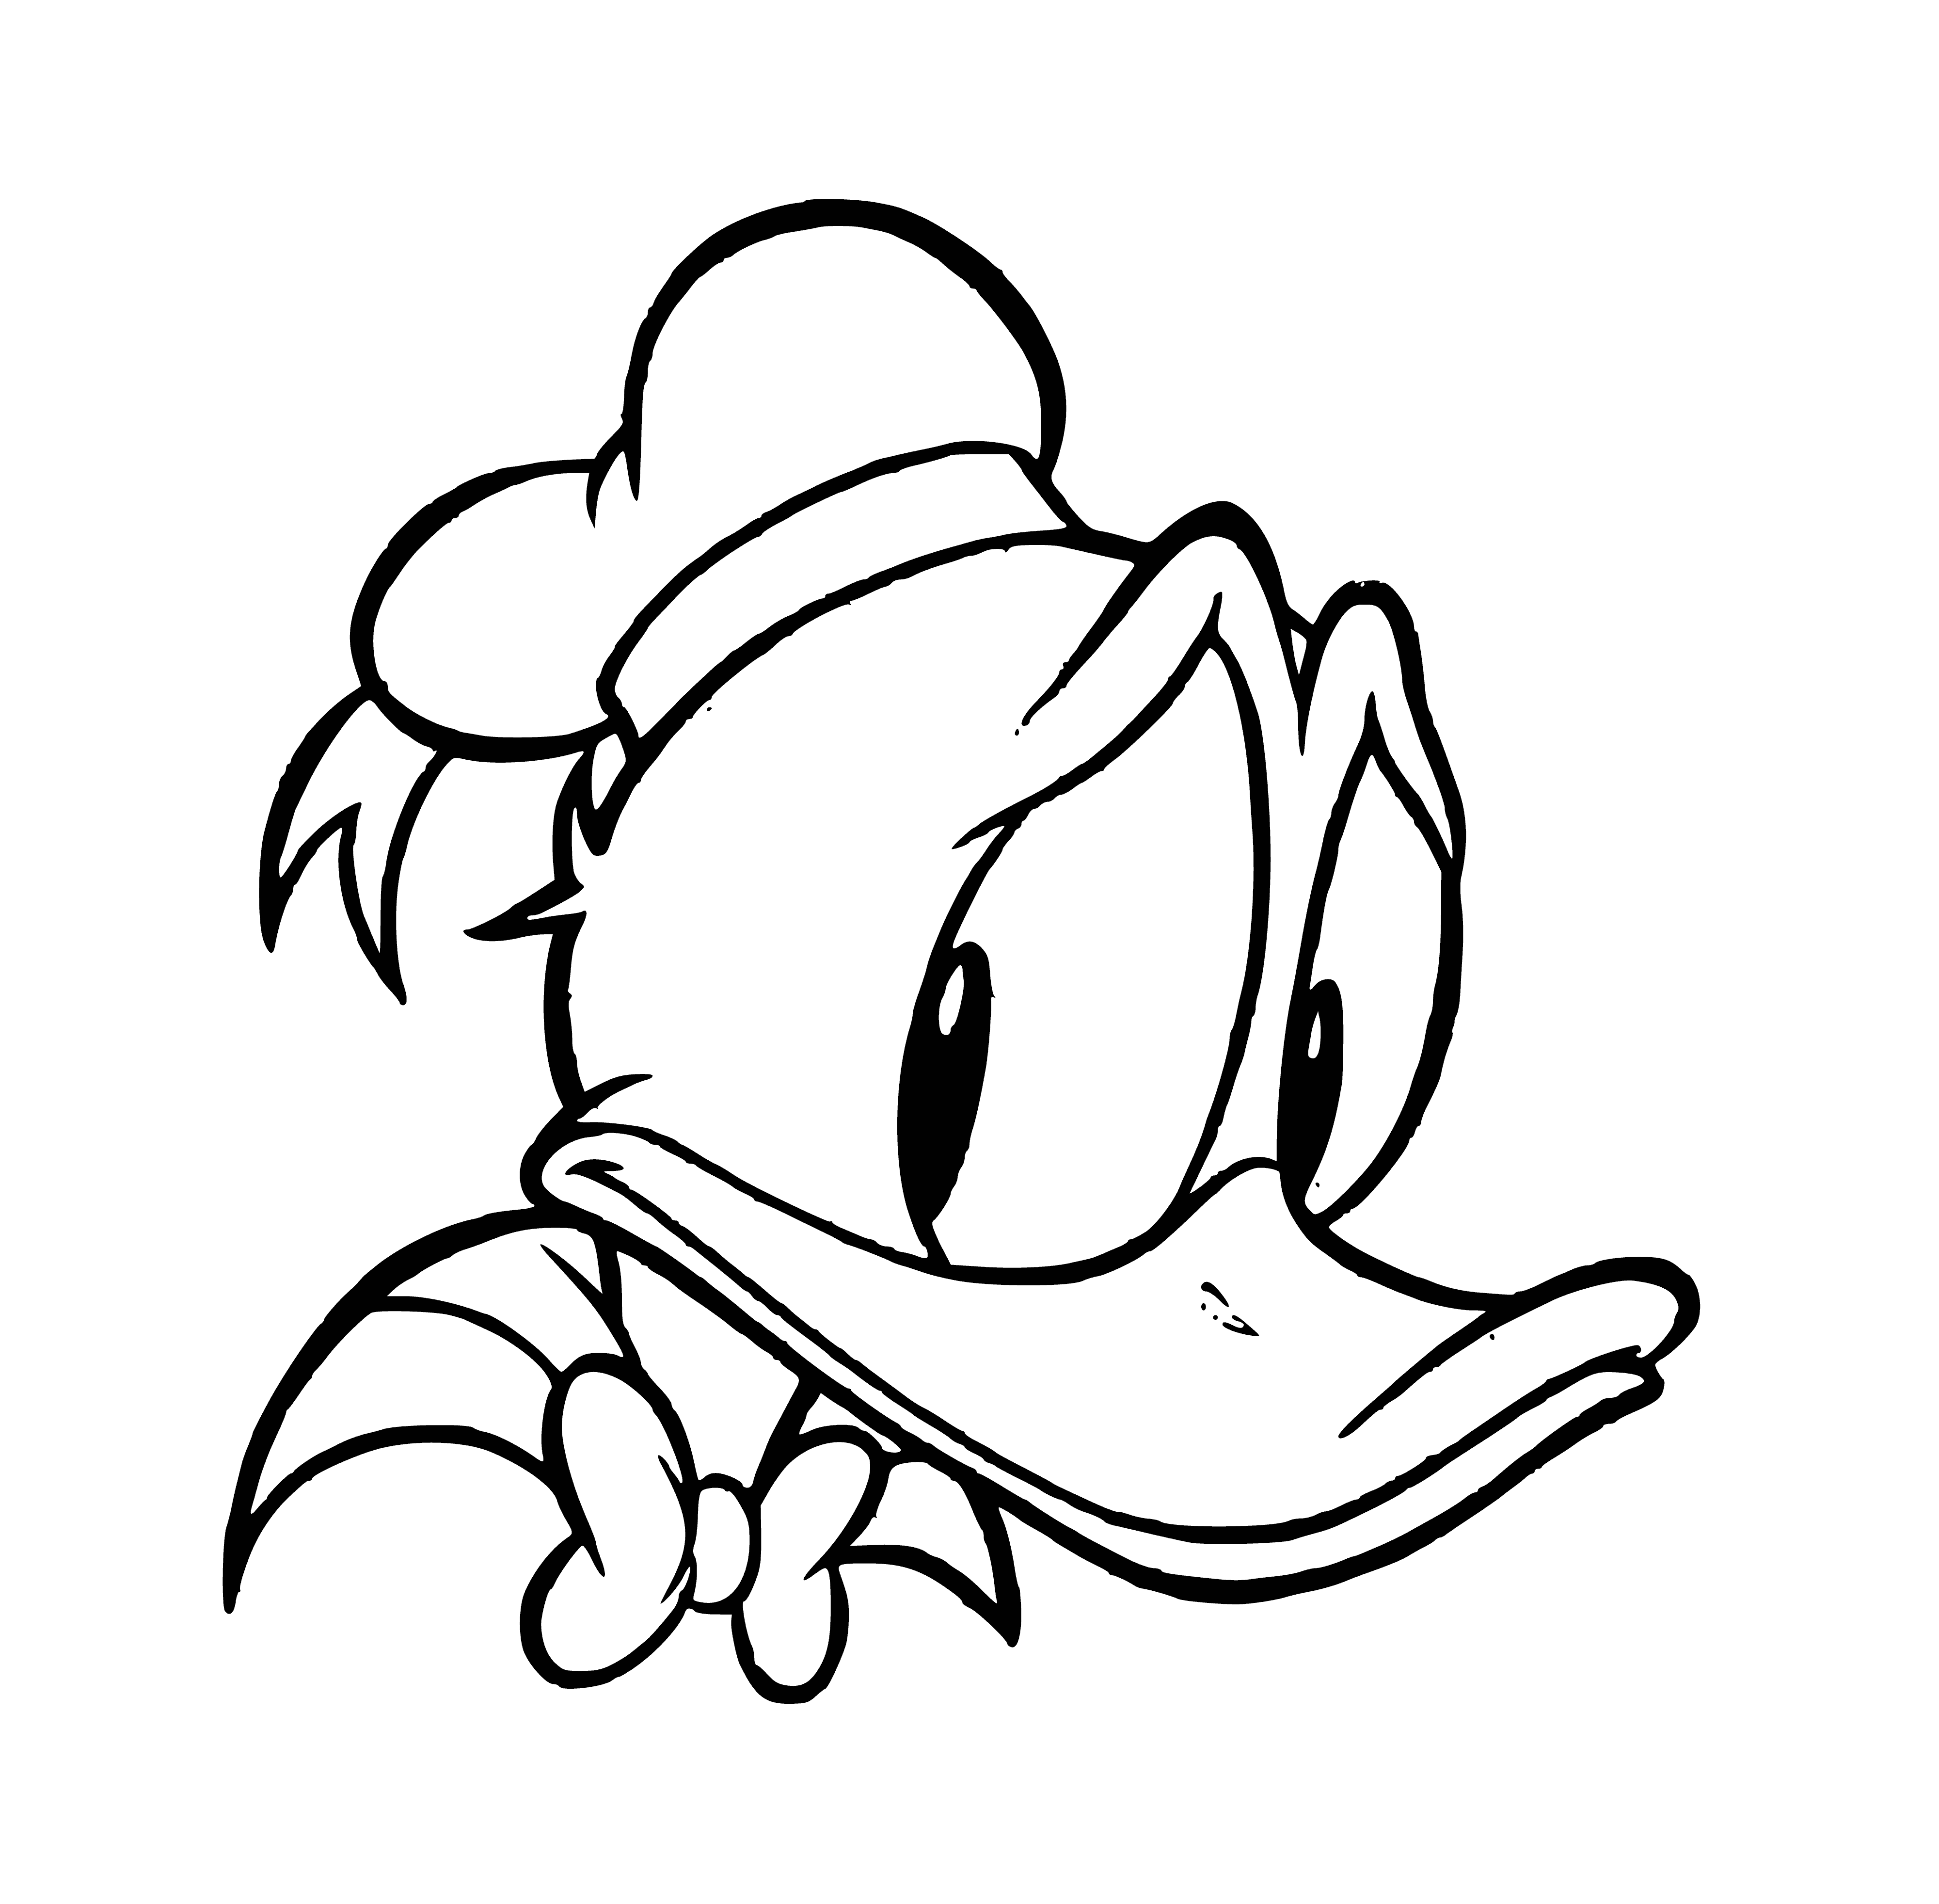 Donald coloring page